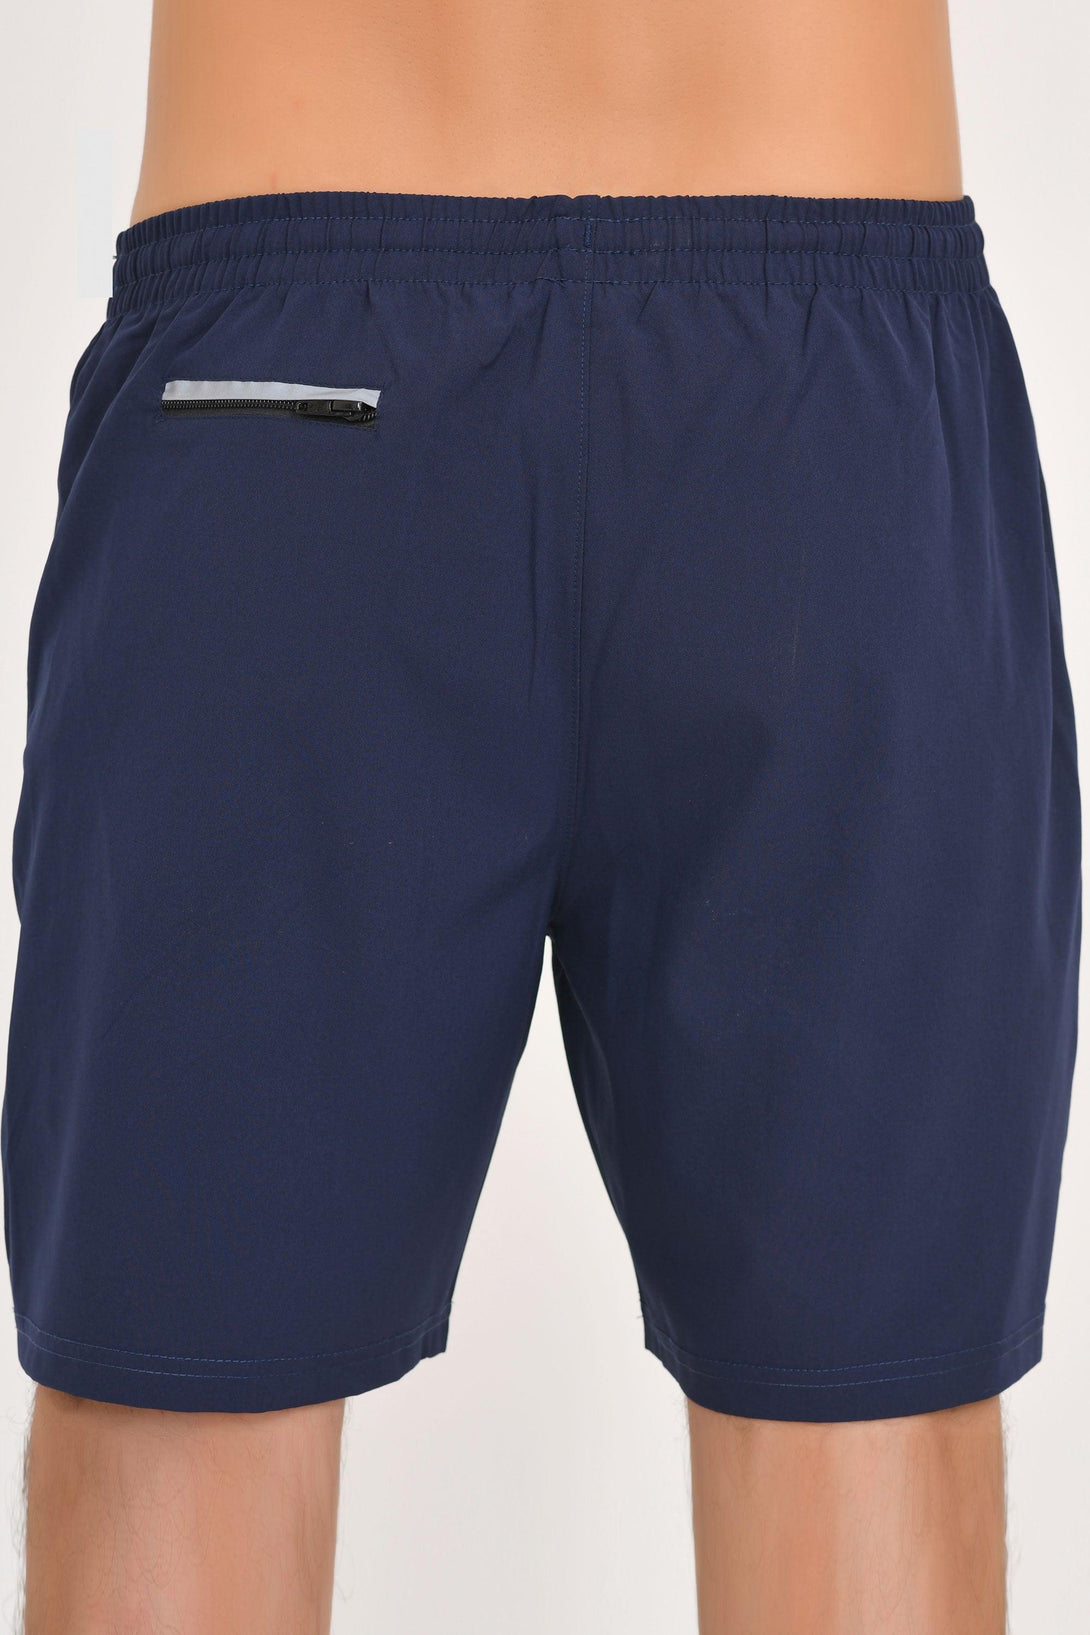 Shorts 100% Polyester 100% POLYESTER | NAVY - ROYAL Pack of 2 - FTS